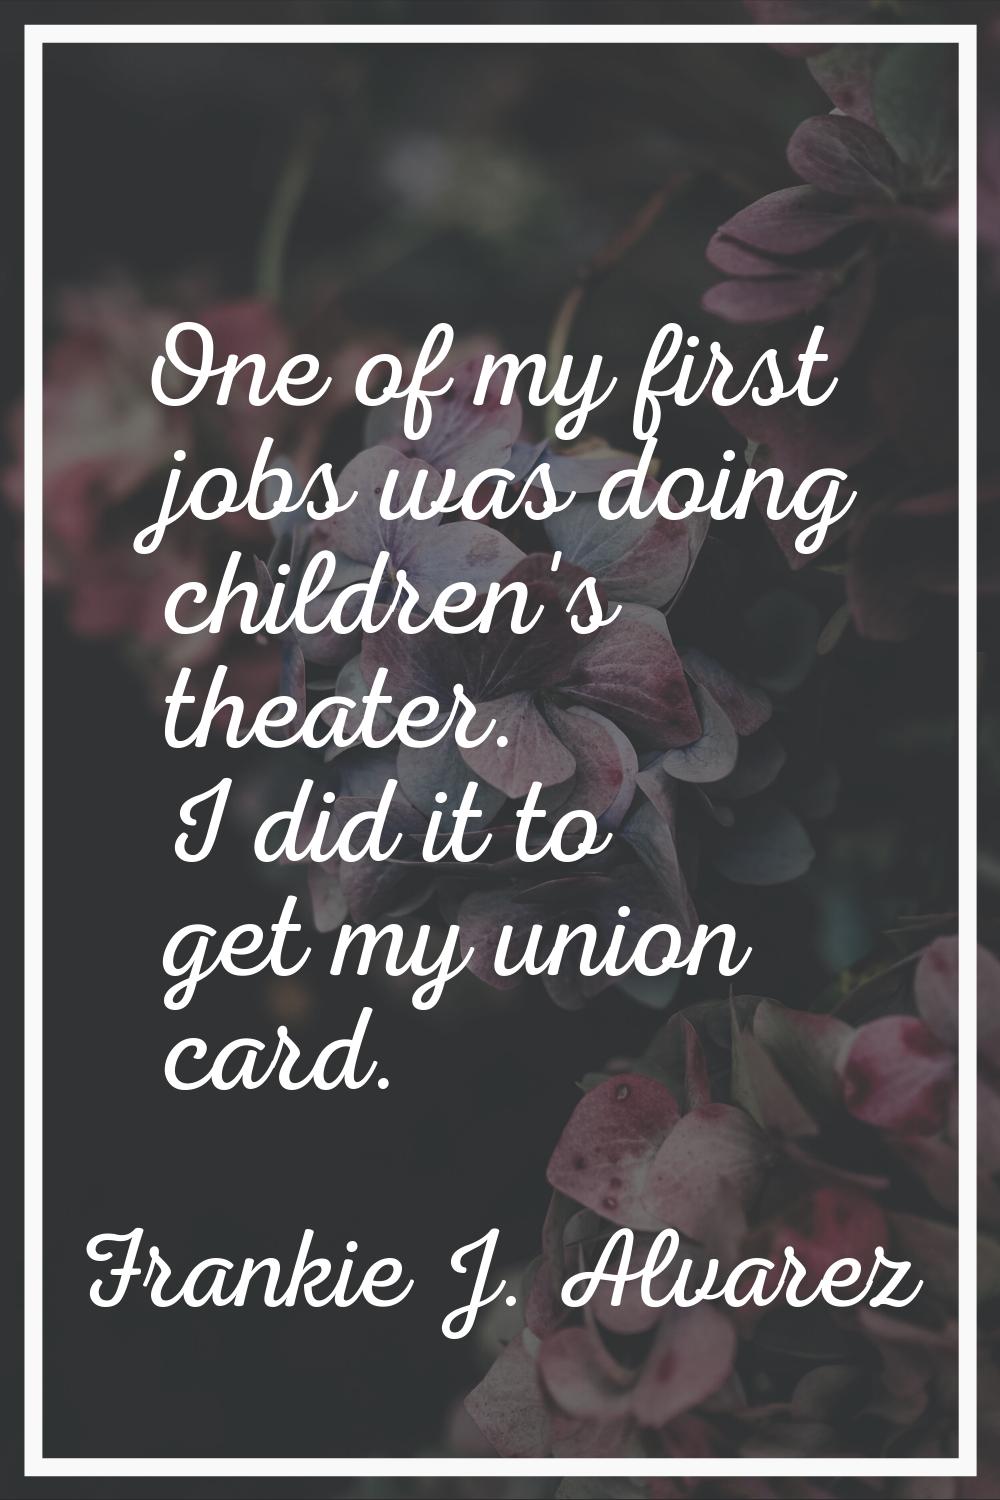 One of my first jobs was doing children's theater. I did it to get my union card.